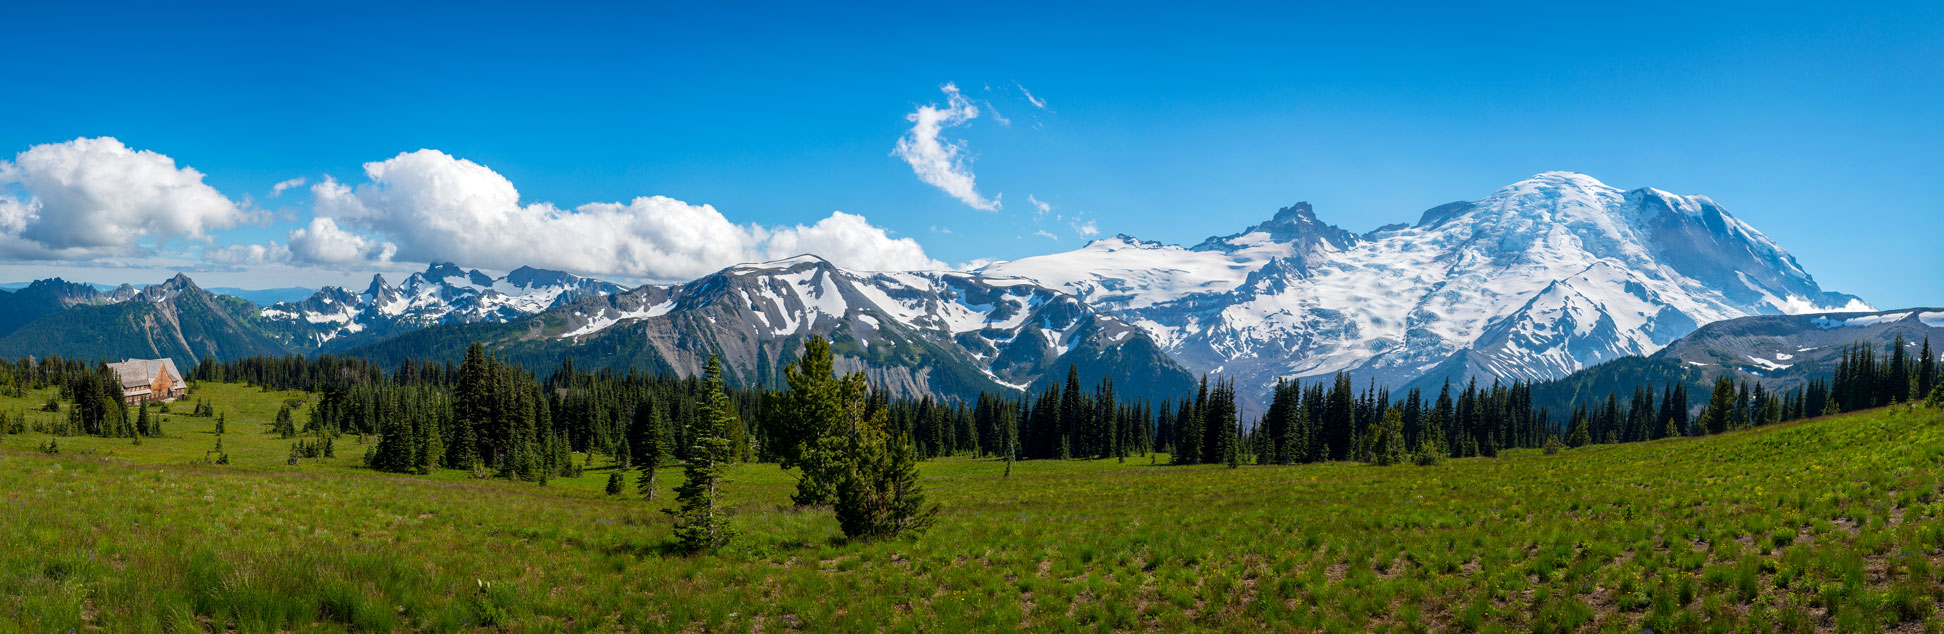 Panorama of Mount Rainier, also known as Tahoma or Tacoma, an active stratovolcano in southwestern Washington State